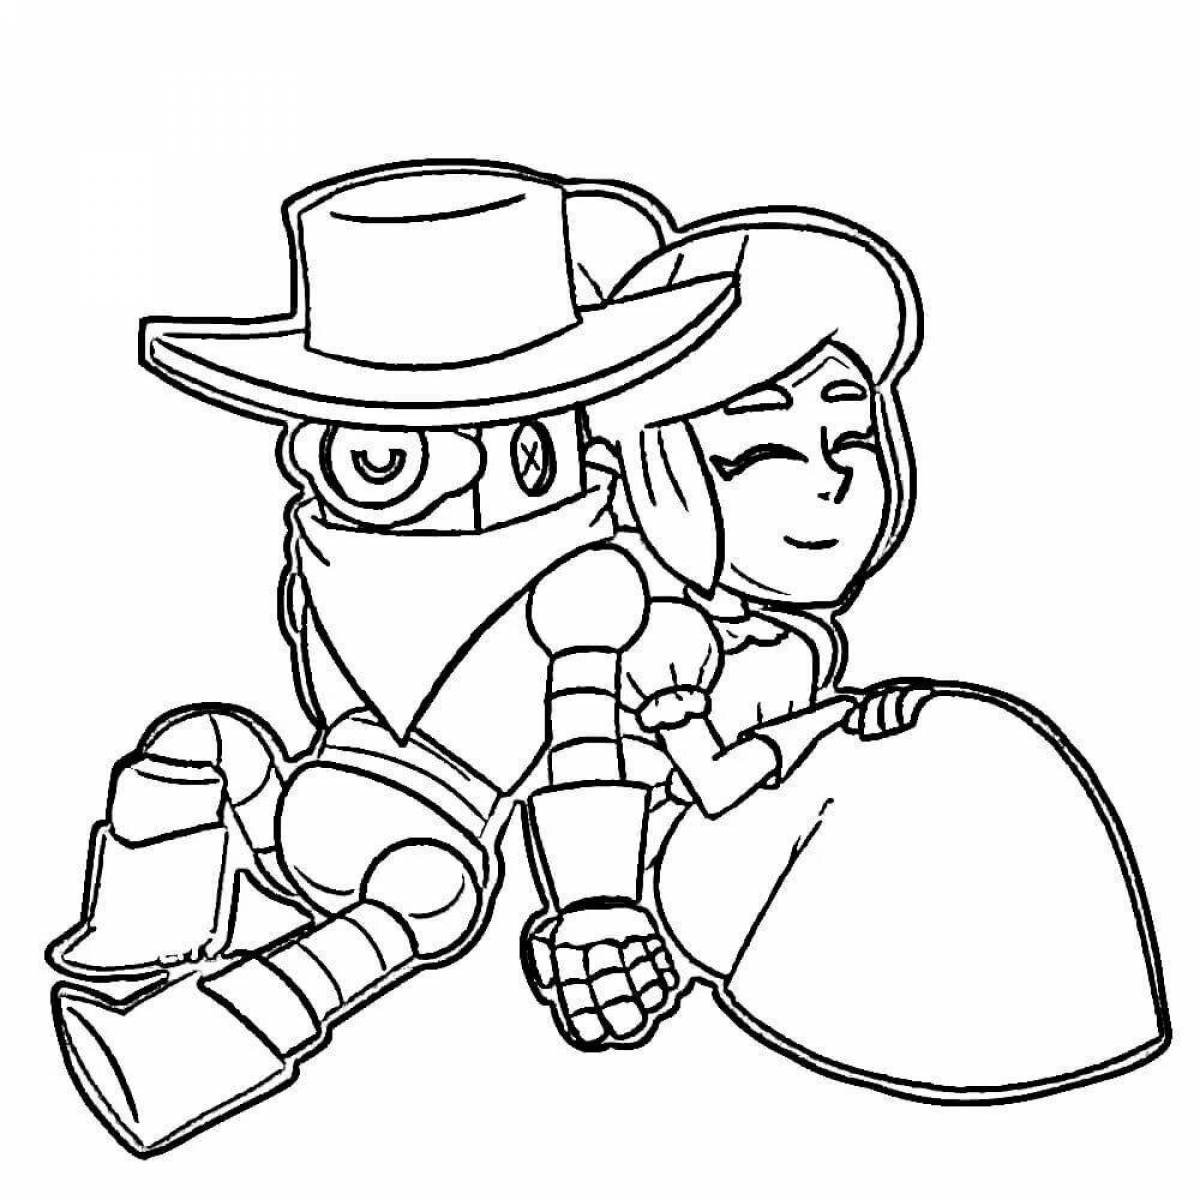 Great leon and raven coloring pages